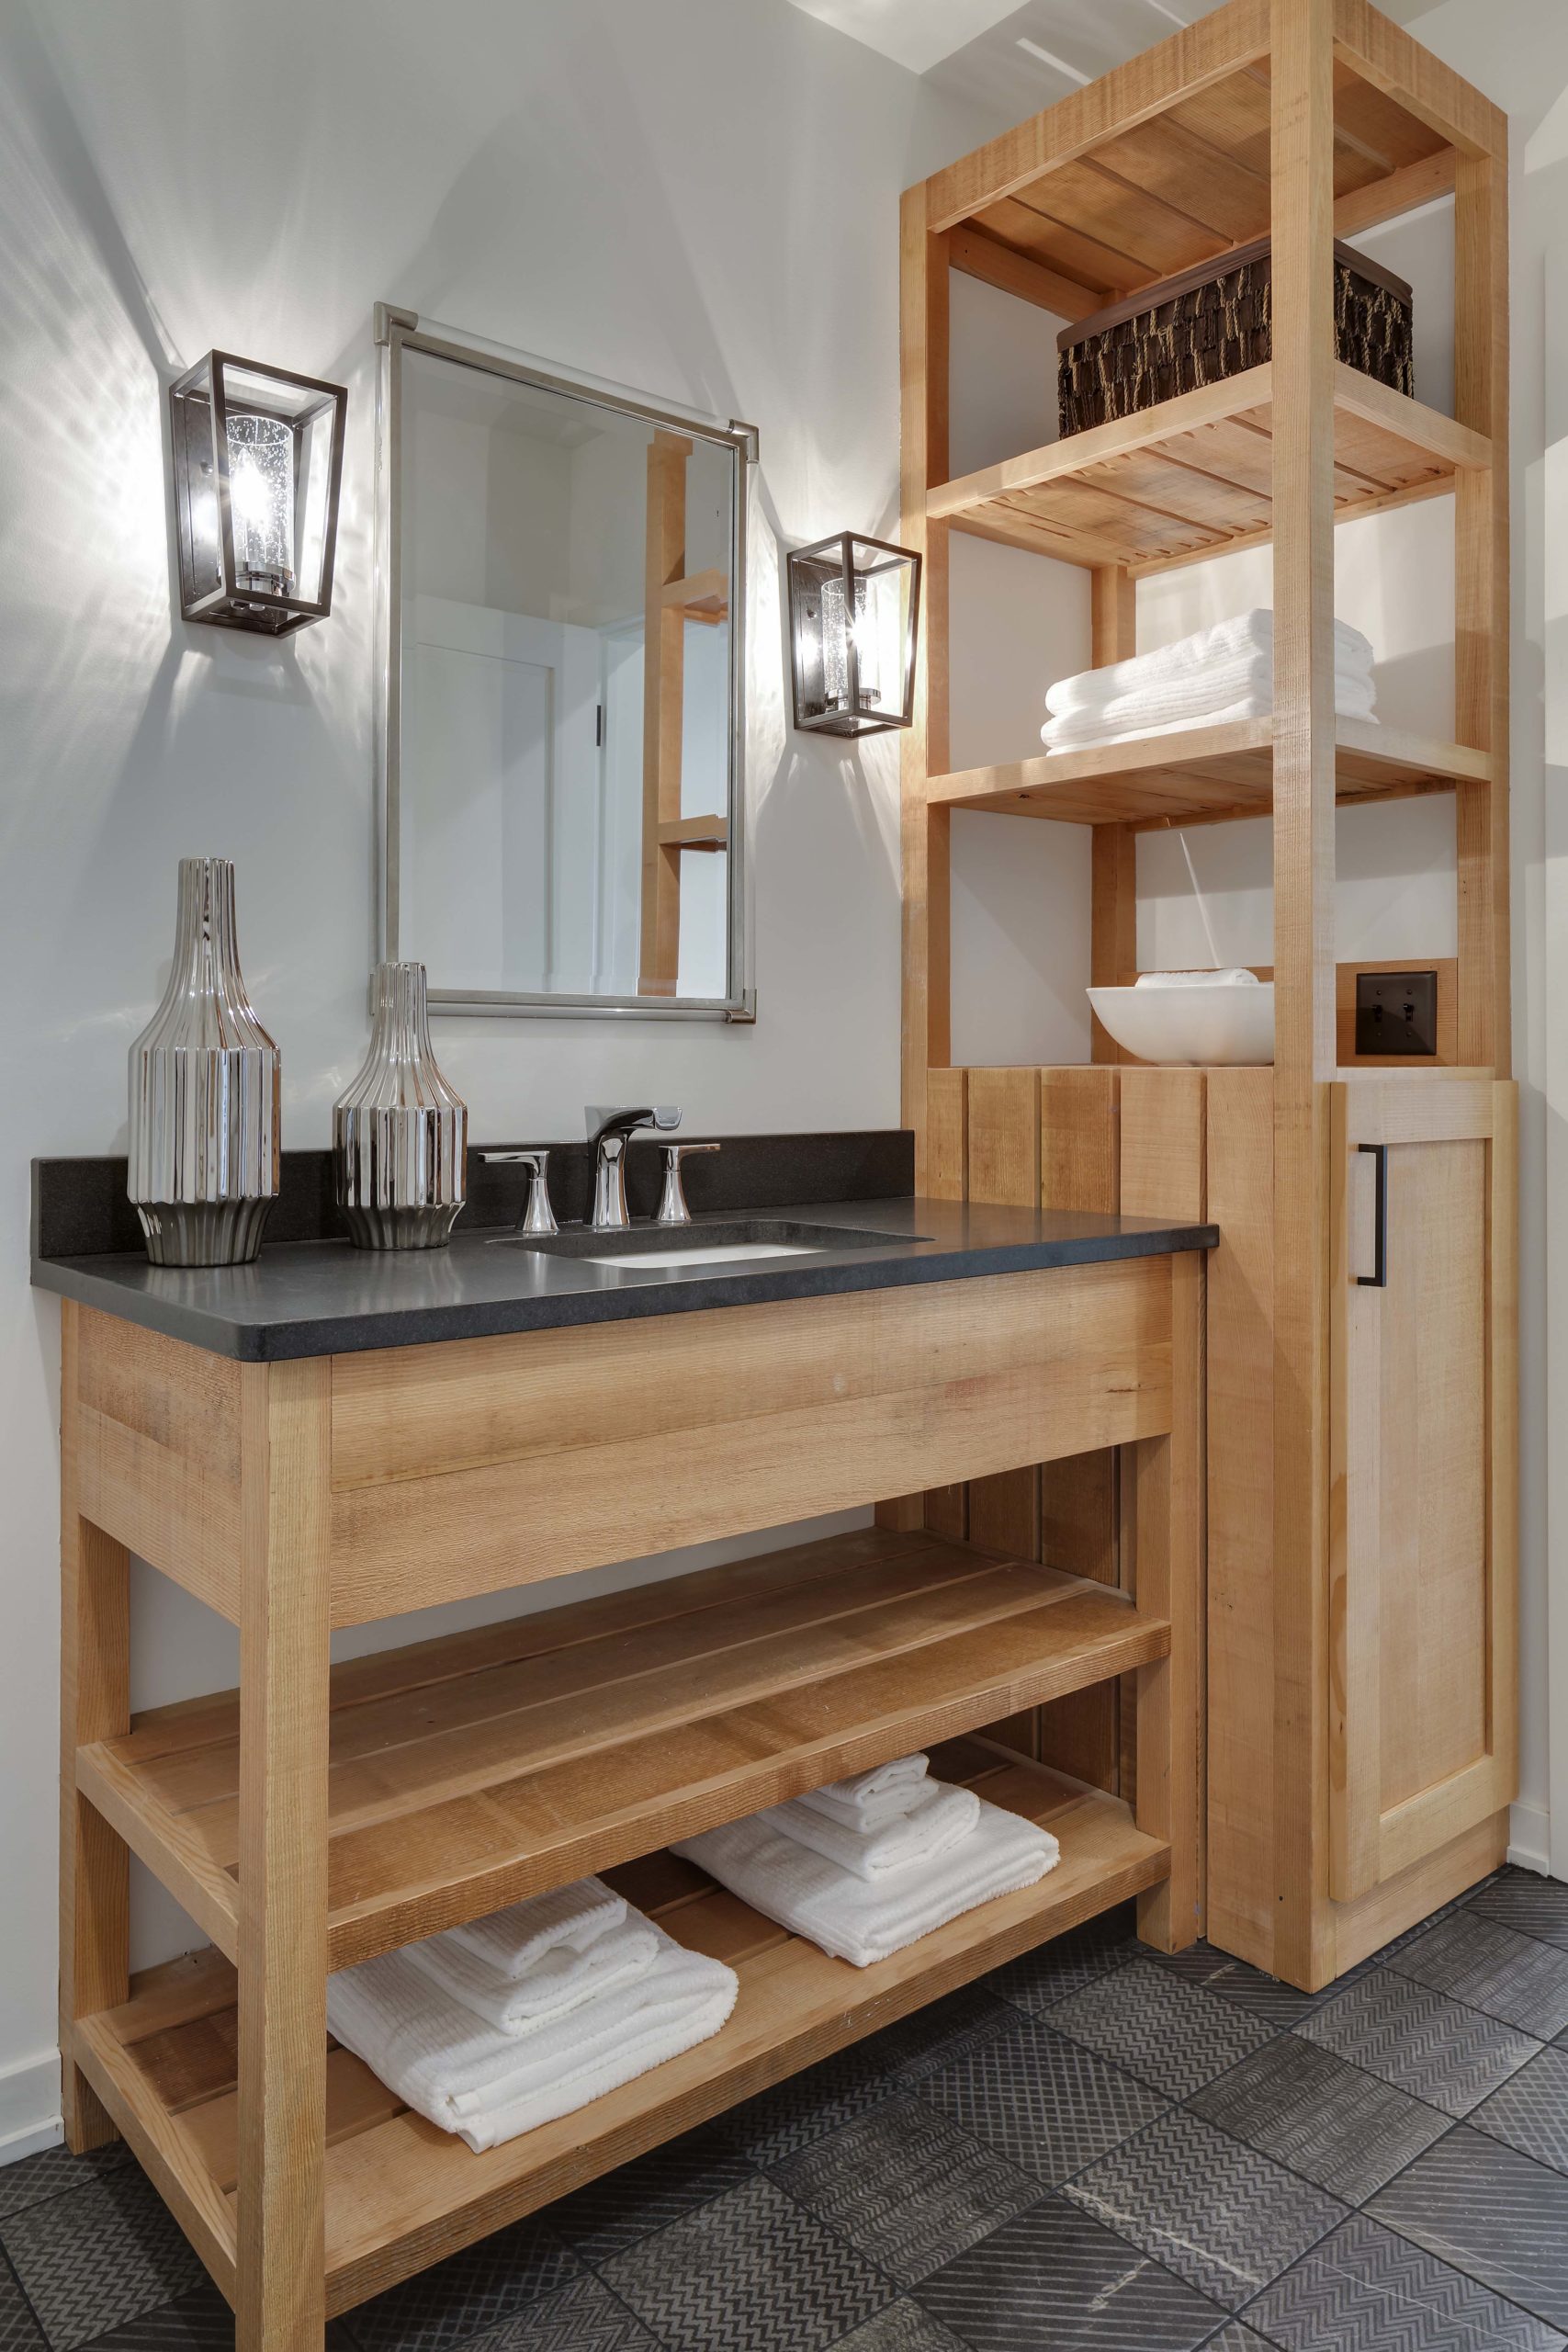 wood bathroom vanity with open wood shelving to hold towels